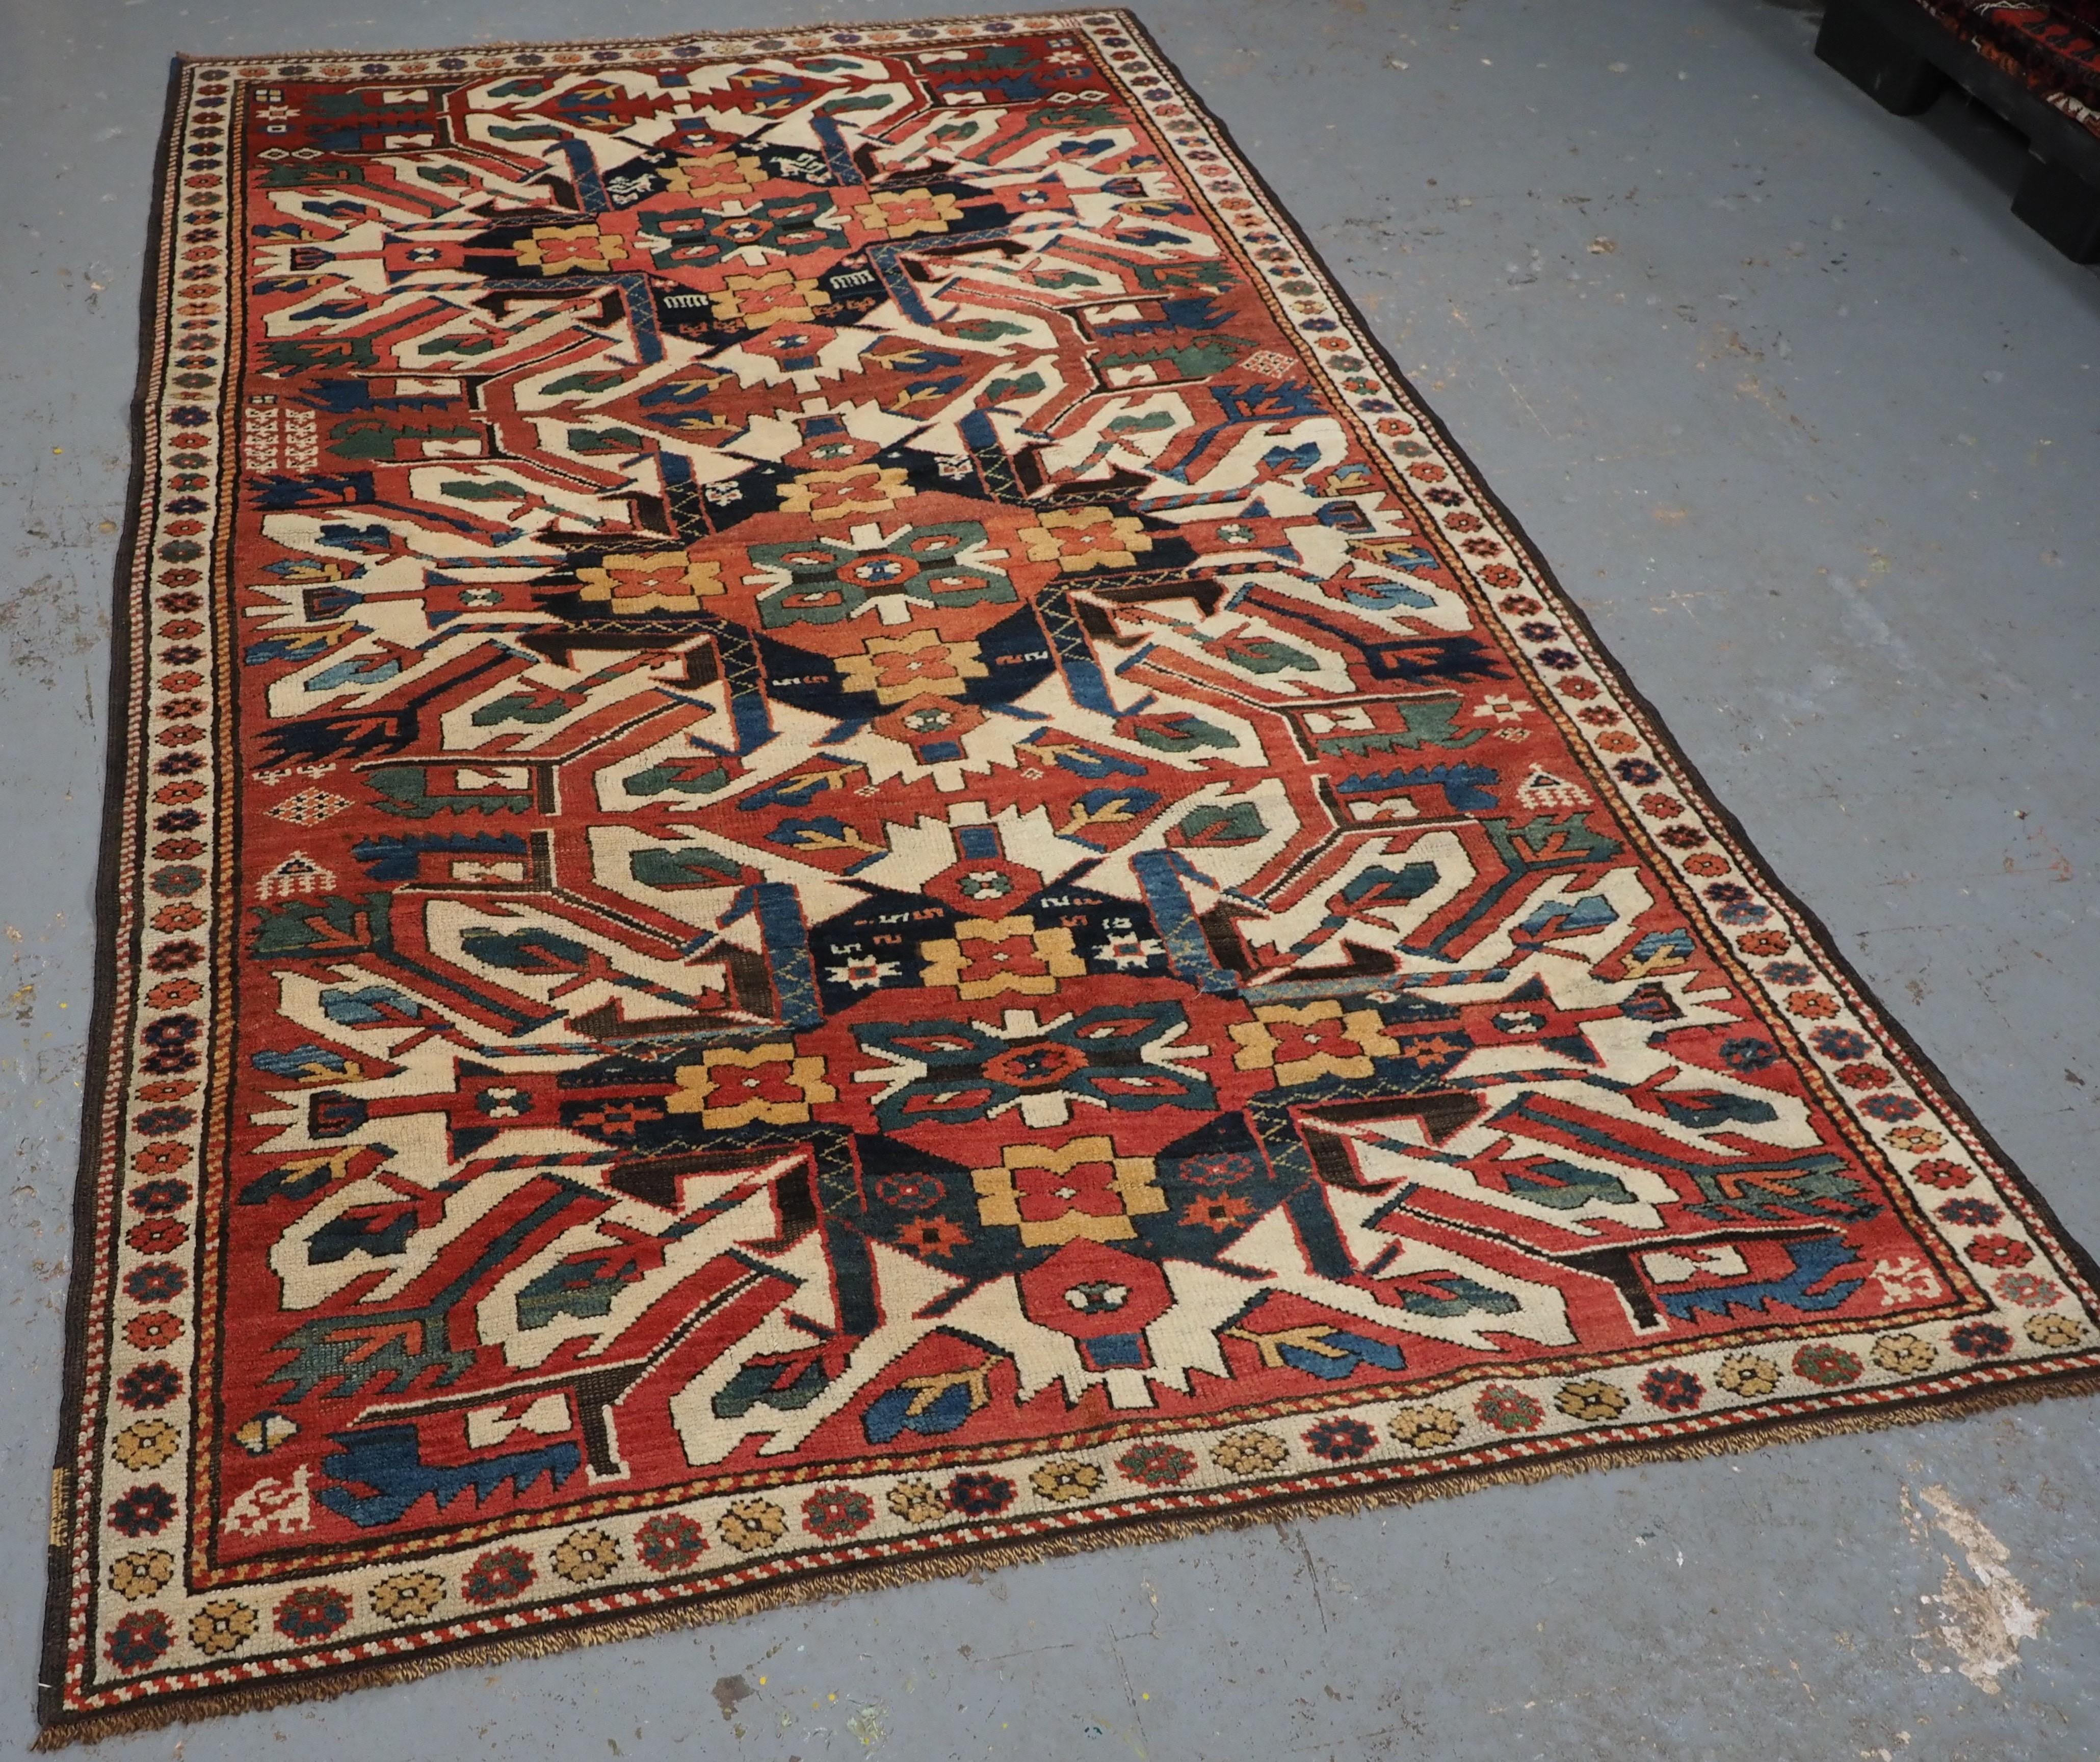 Size: 7ft 7in x 4ft 6in (232 x 138cm)

Antique Caucasian Chelaberd Kazak triple medallion rug.

Circa 1890.

A superb Kazak rug of the sought after and well known Chelaberd design, also known as Eagle (Adler) or Sunburst Kazak rugs. These rugs are